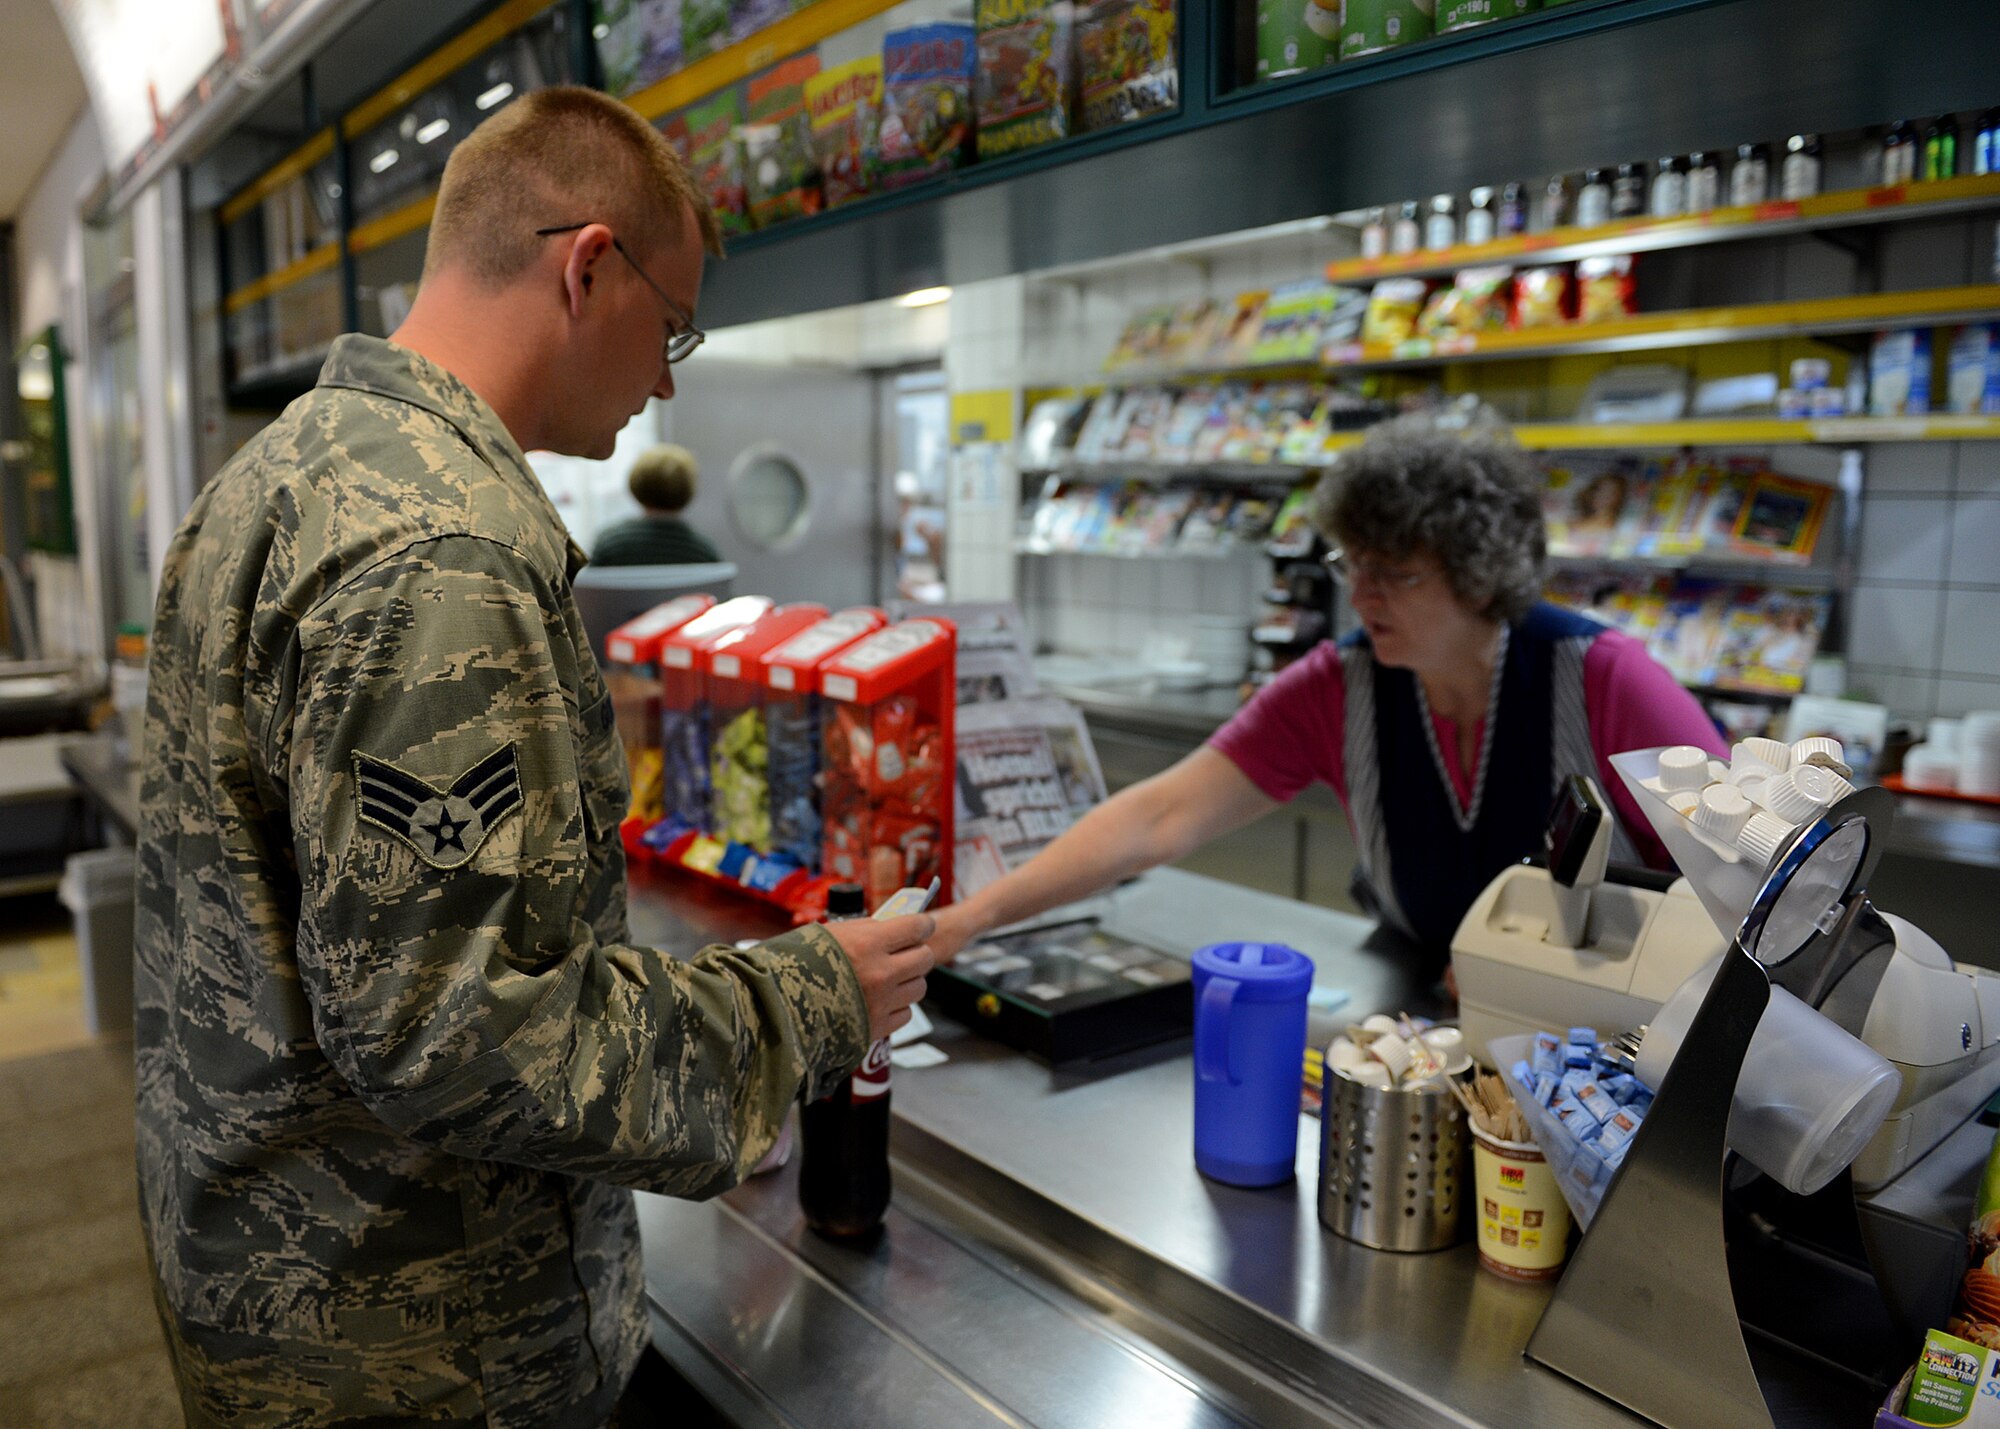 U.S. Air Force Robert Gordon, 606th Air Control Squadron power production apprentice, orders food during a stop at Schwarzenborn, Germany, June 3, 2014. The convoy vehicles experienced some mechanical issues that required support from Spangdahlem Air Base’s vehicle maintenance personnel. The Bundeswehr, or German armed forces, hosted U.S. Airmen from Spangdahlem Air Base, Germany, while waiting for a replacement part before continuing to Powidz Air  Base, Poland, to provide air control to NATO air assets during various combined exercises. (U.S. Air Force photo by Airman 1st Class Kyle Gese/Released)